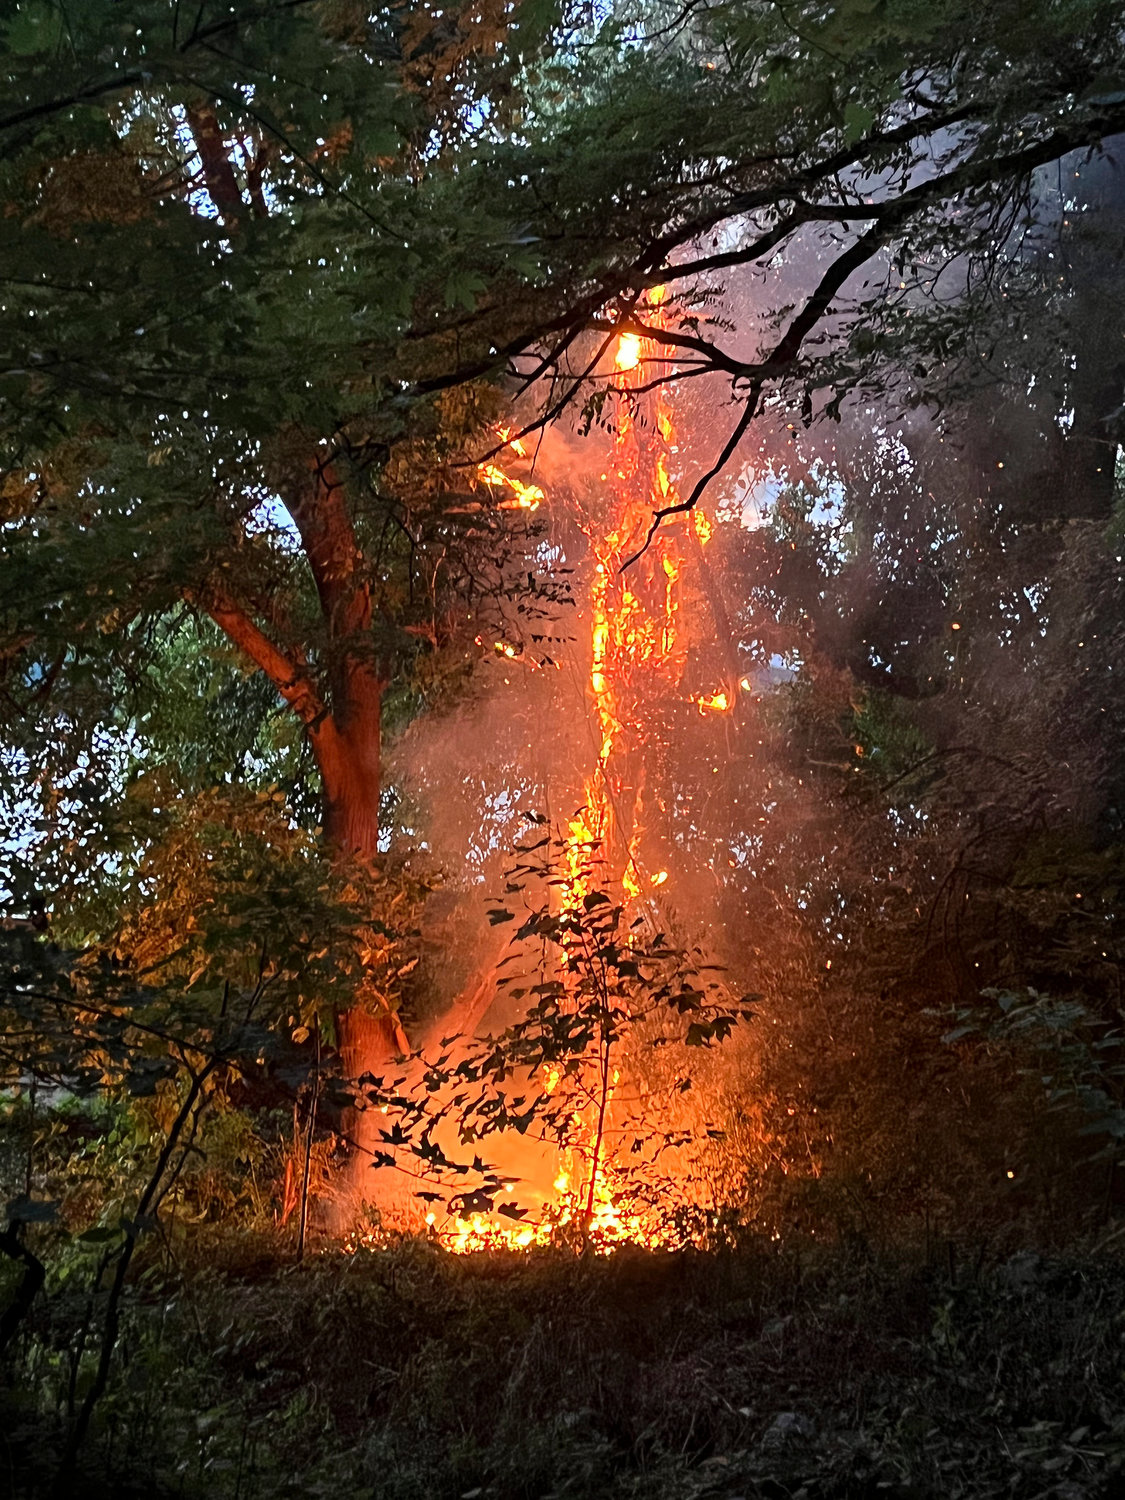 The fire in Riverdale Park off the trail near Palisade Avenue and West 233rd Street was put out quickly by the New York City fire department’s house No. 52 Sunday night. Firefighters had to run eight hose lengths to douse it.